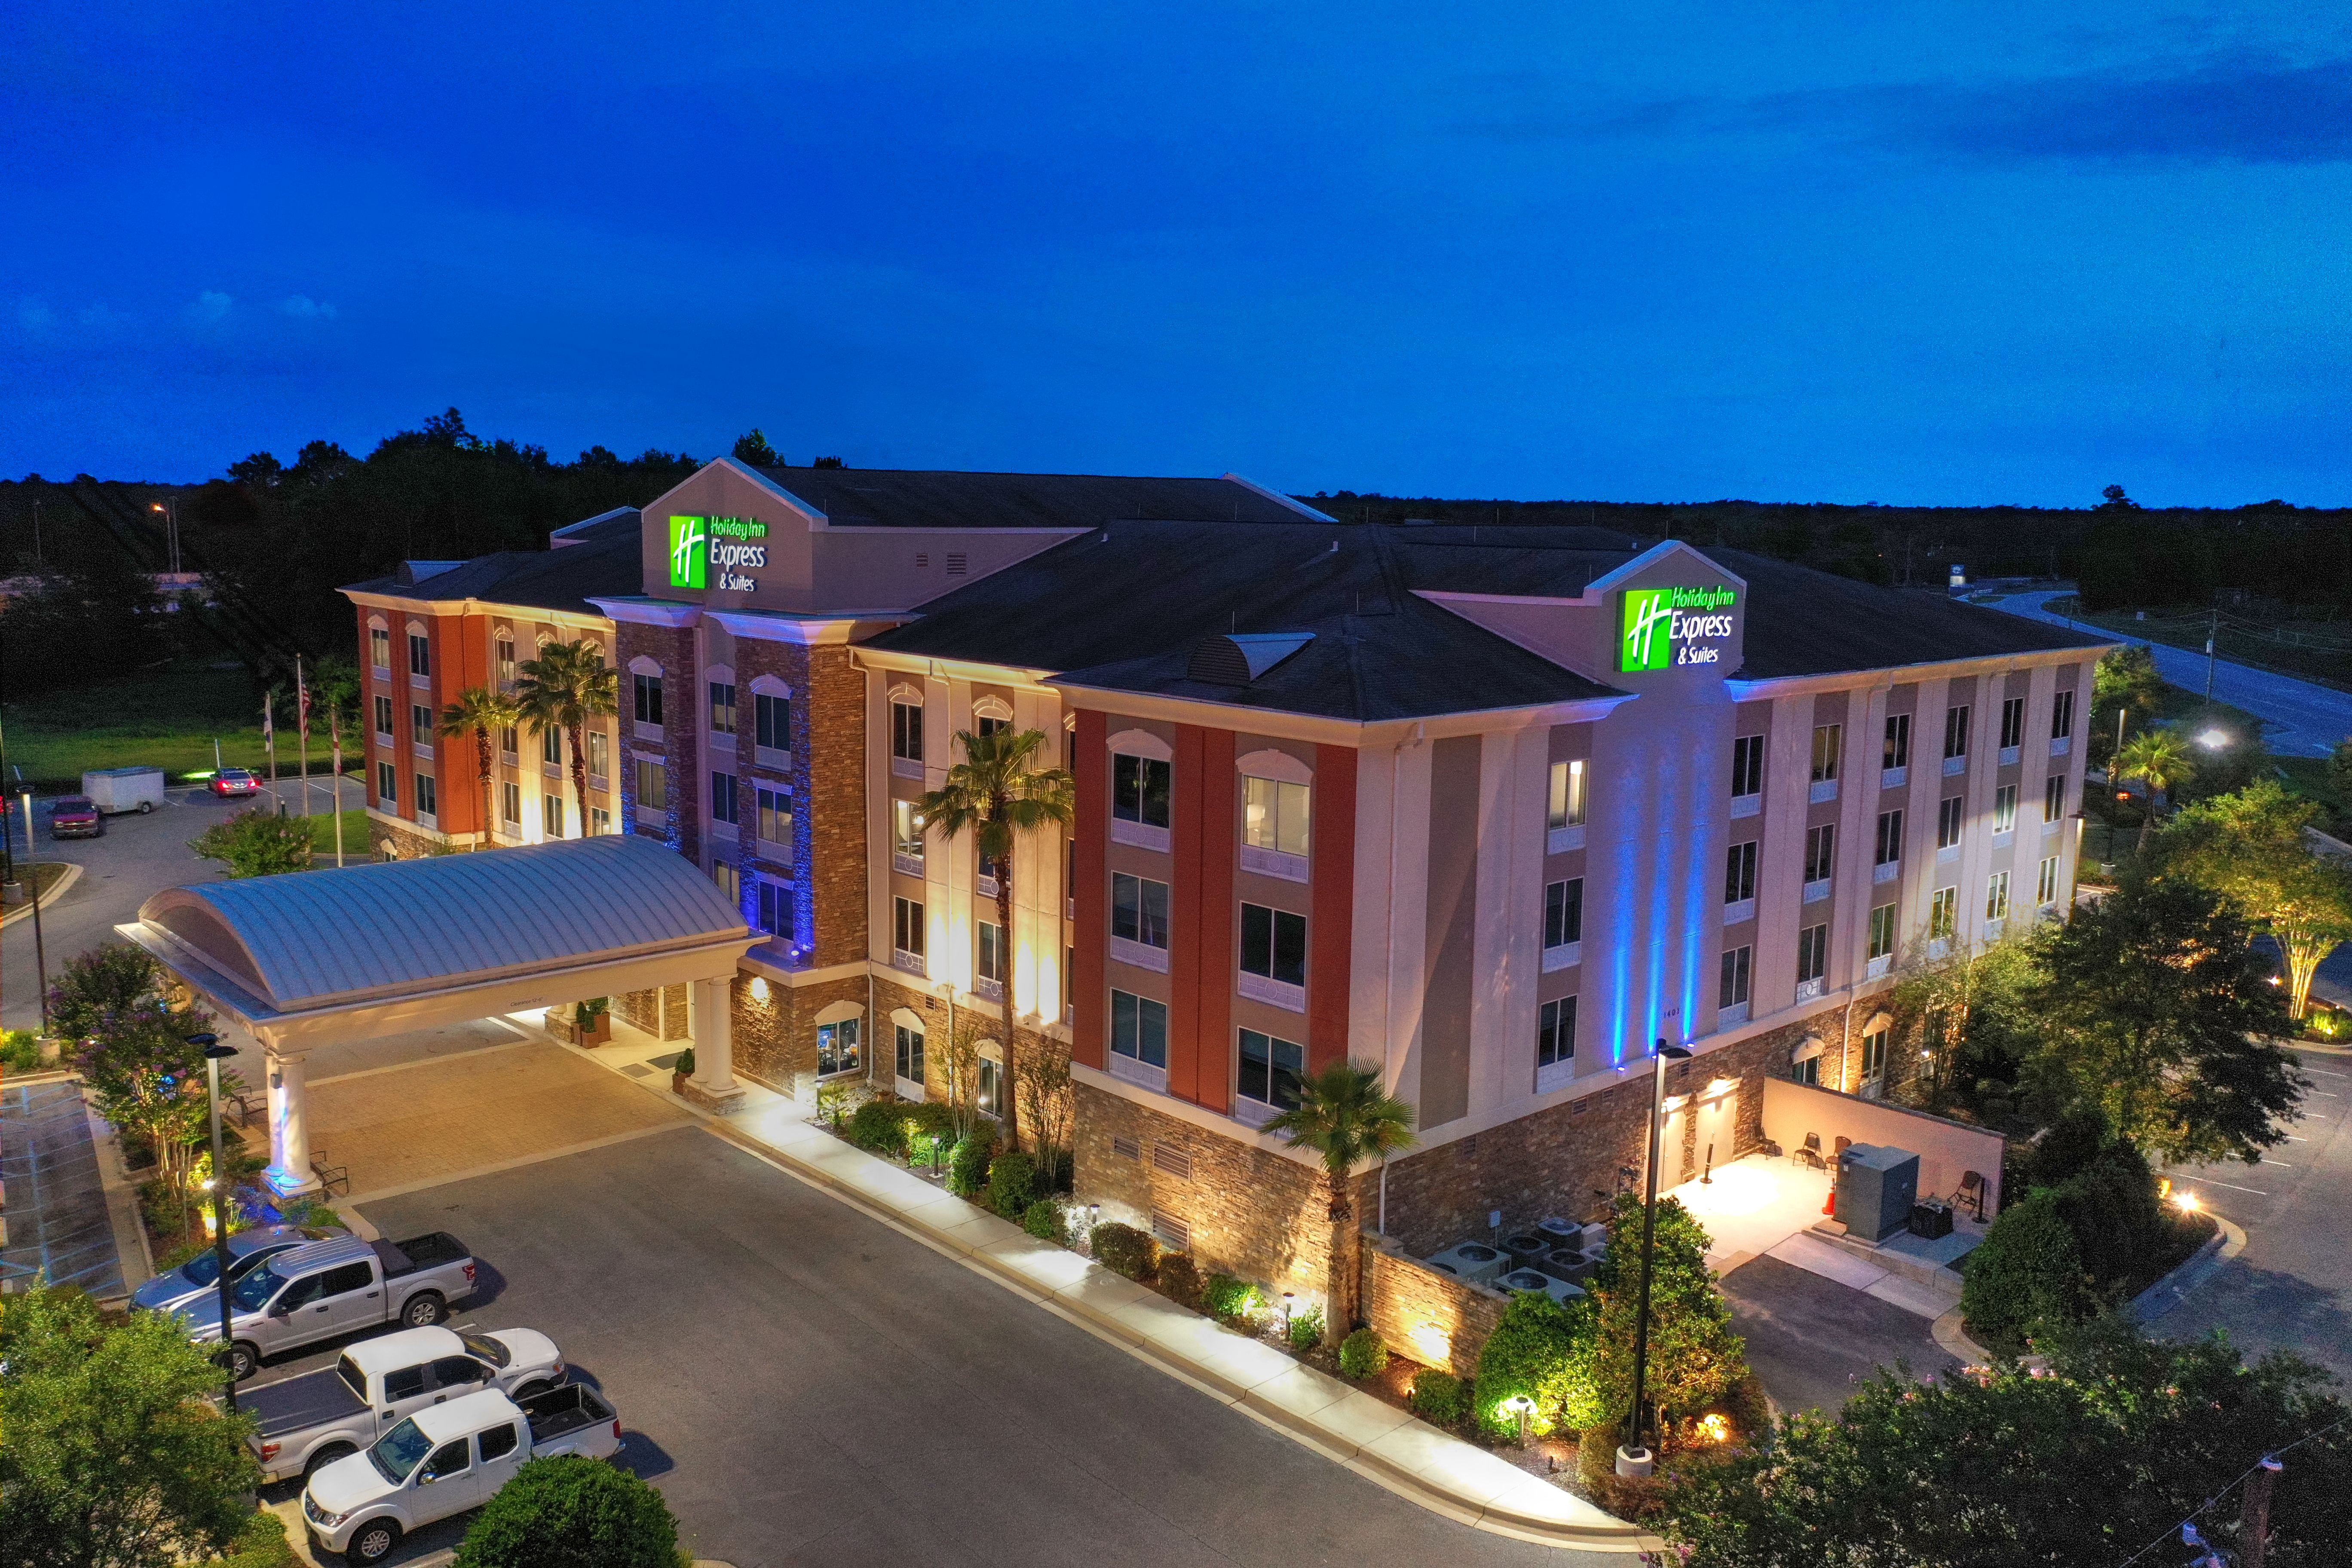 Welcome to the Holiday Inn Express and Suites Saraland, Alabama